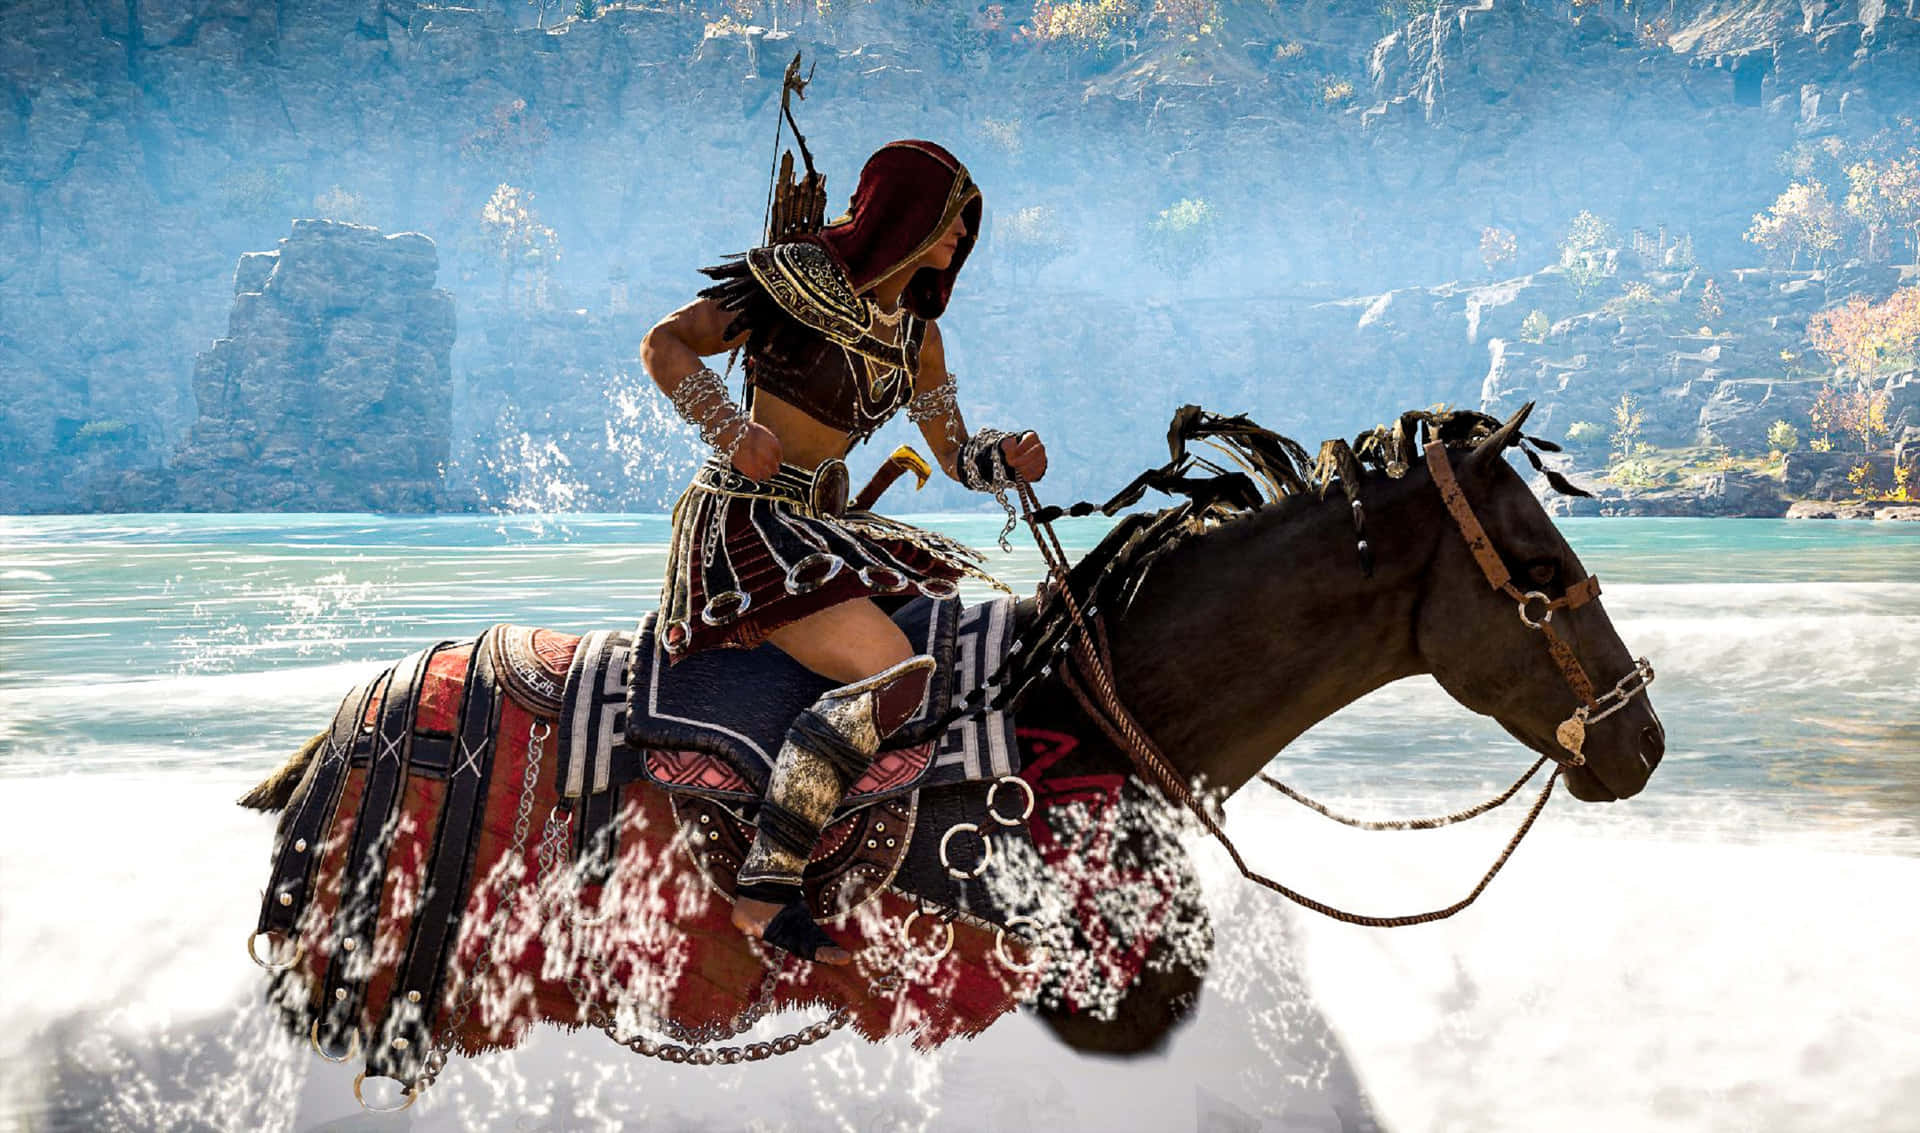 Epic Adventure Awaits in Assassin's Creed Odyssey